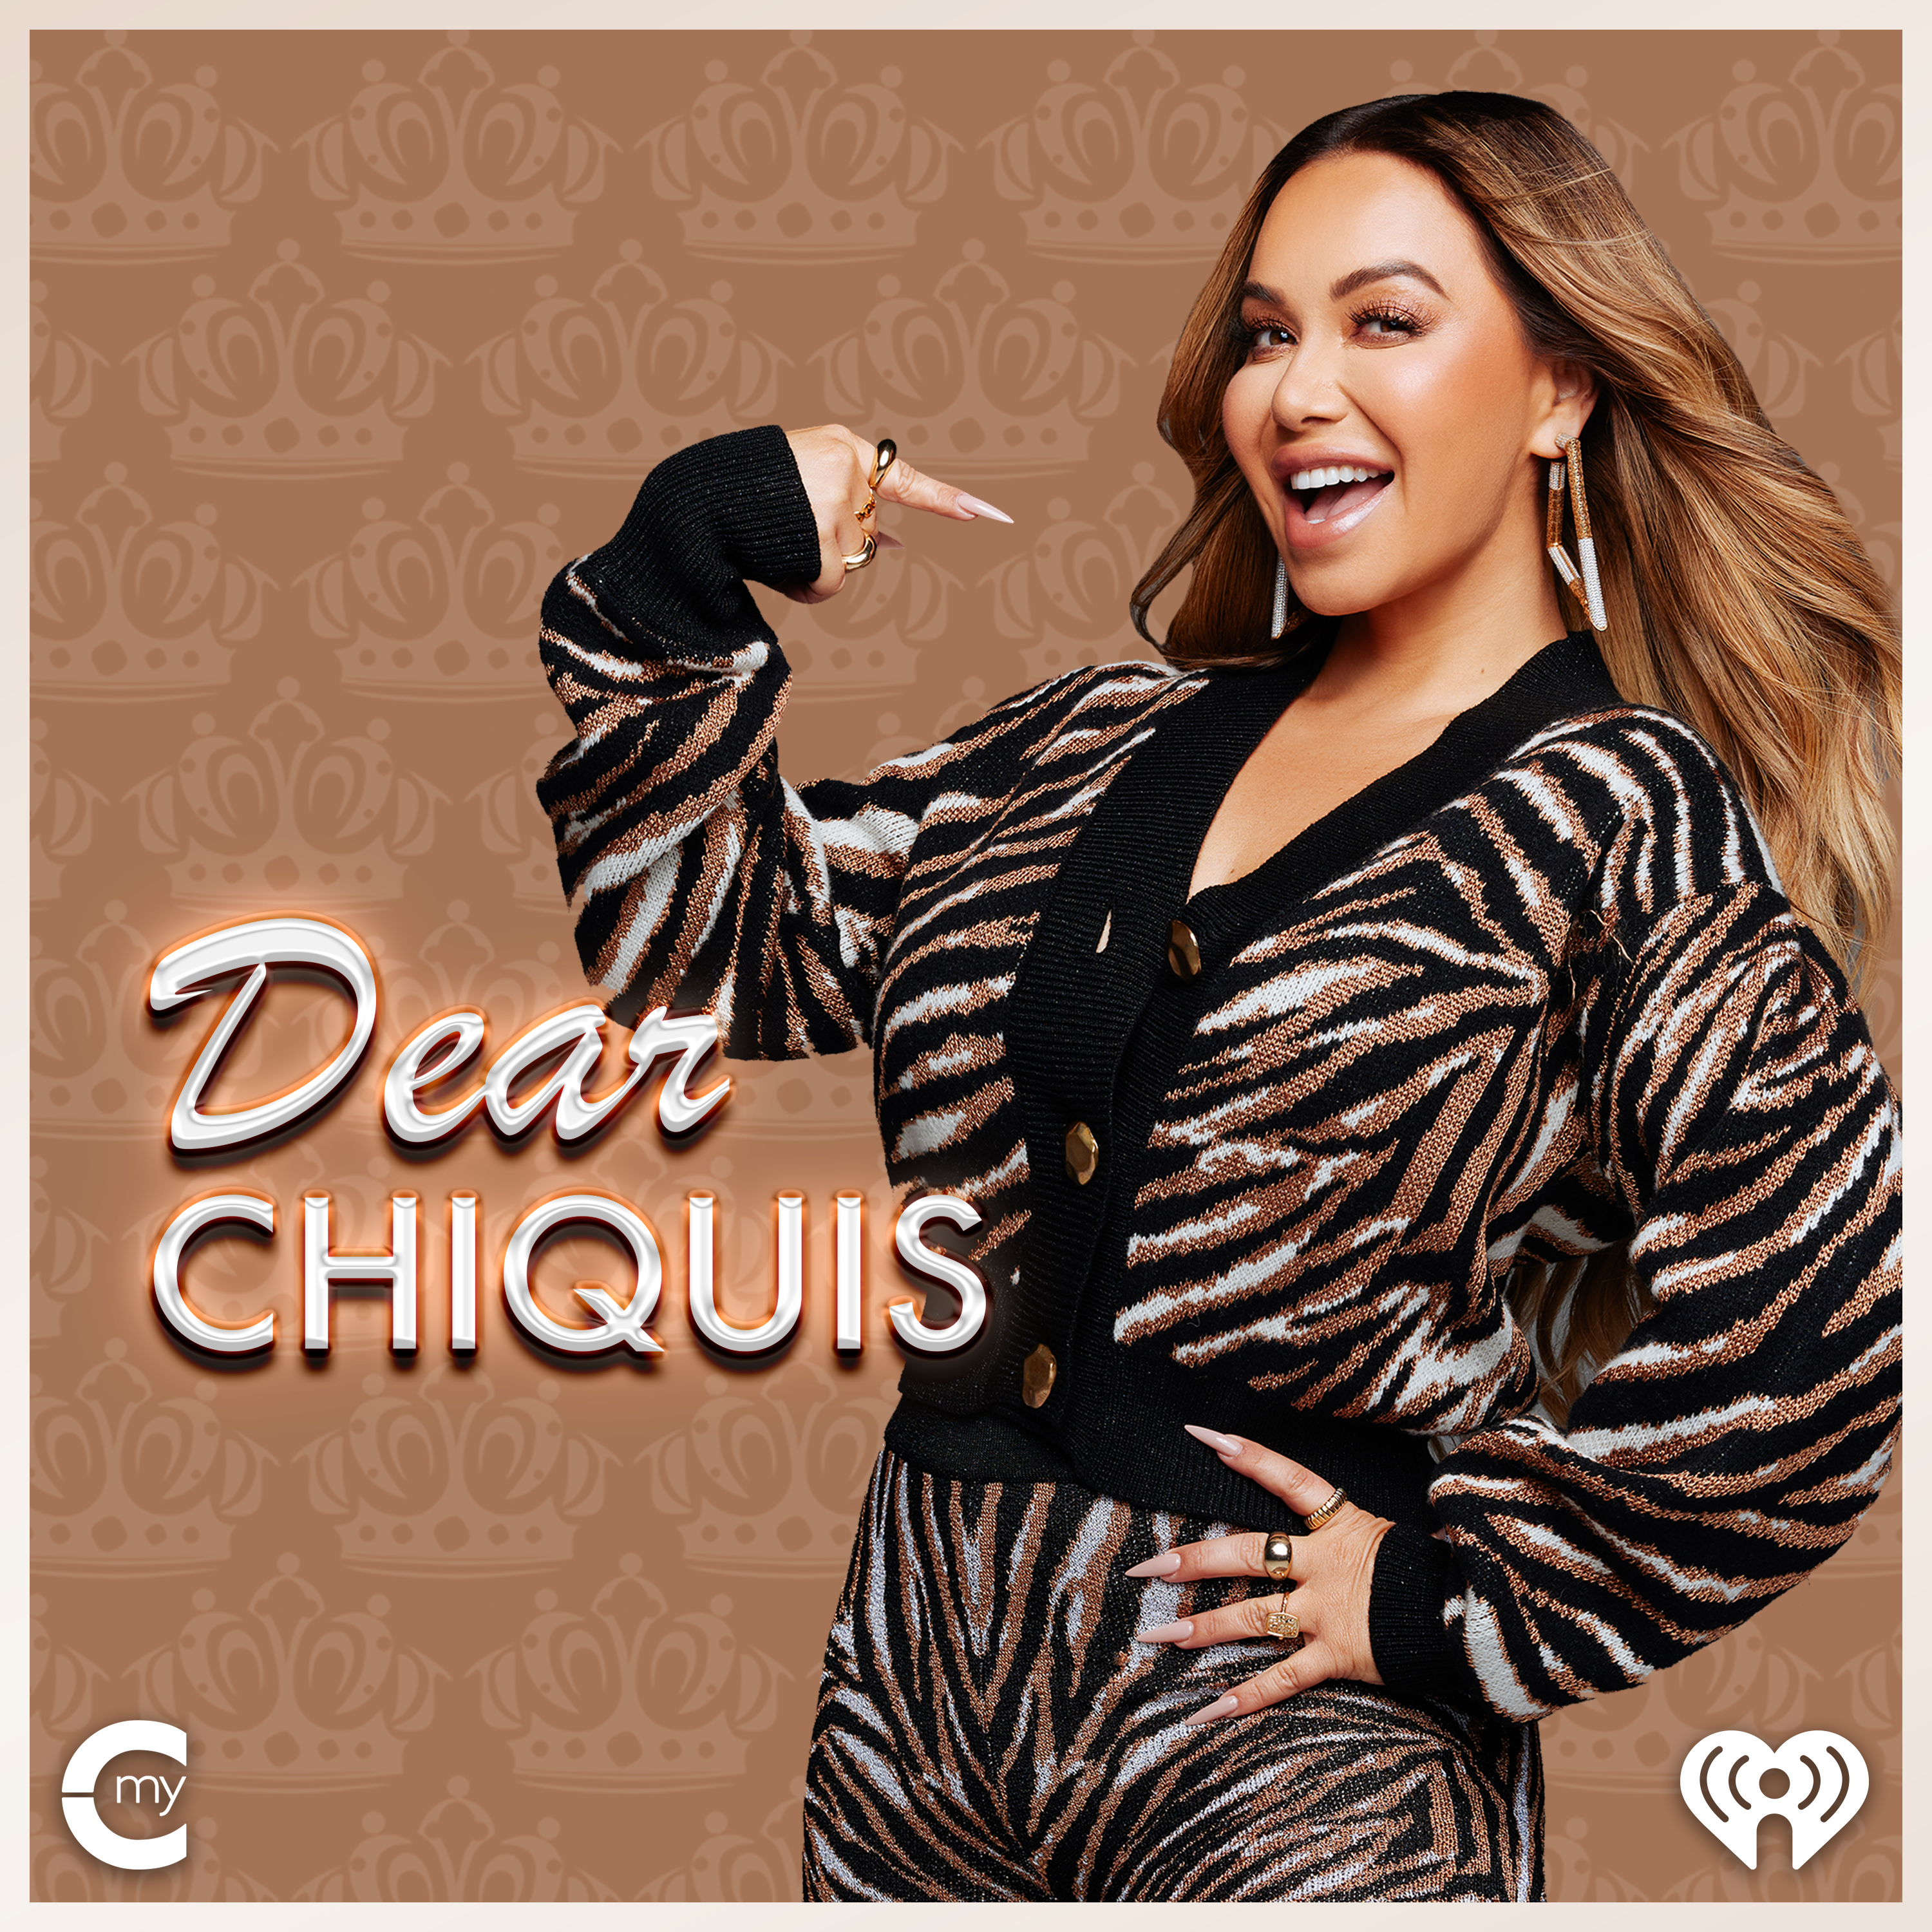 Dear Chiquis: Taming Our Inner Alpha Female, Gastric Sleeve Tips and Dealing with Ex-Wife Drama